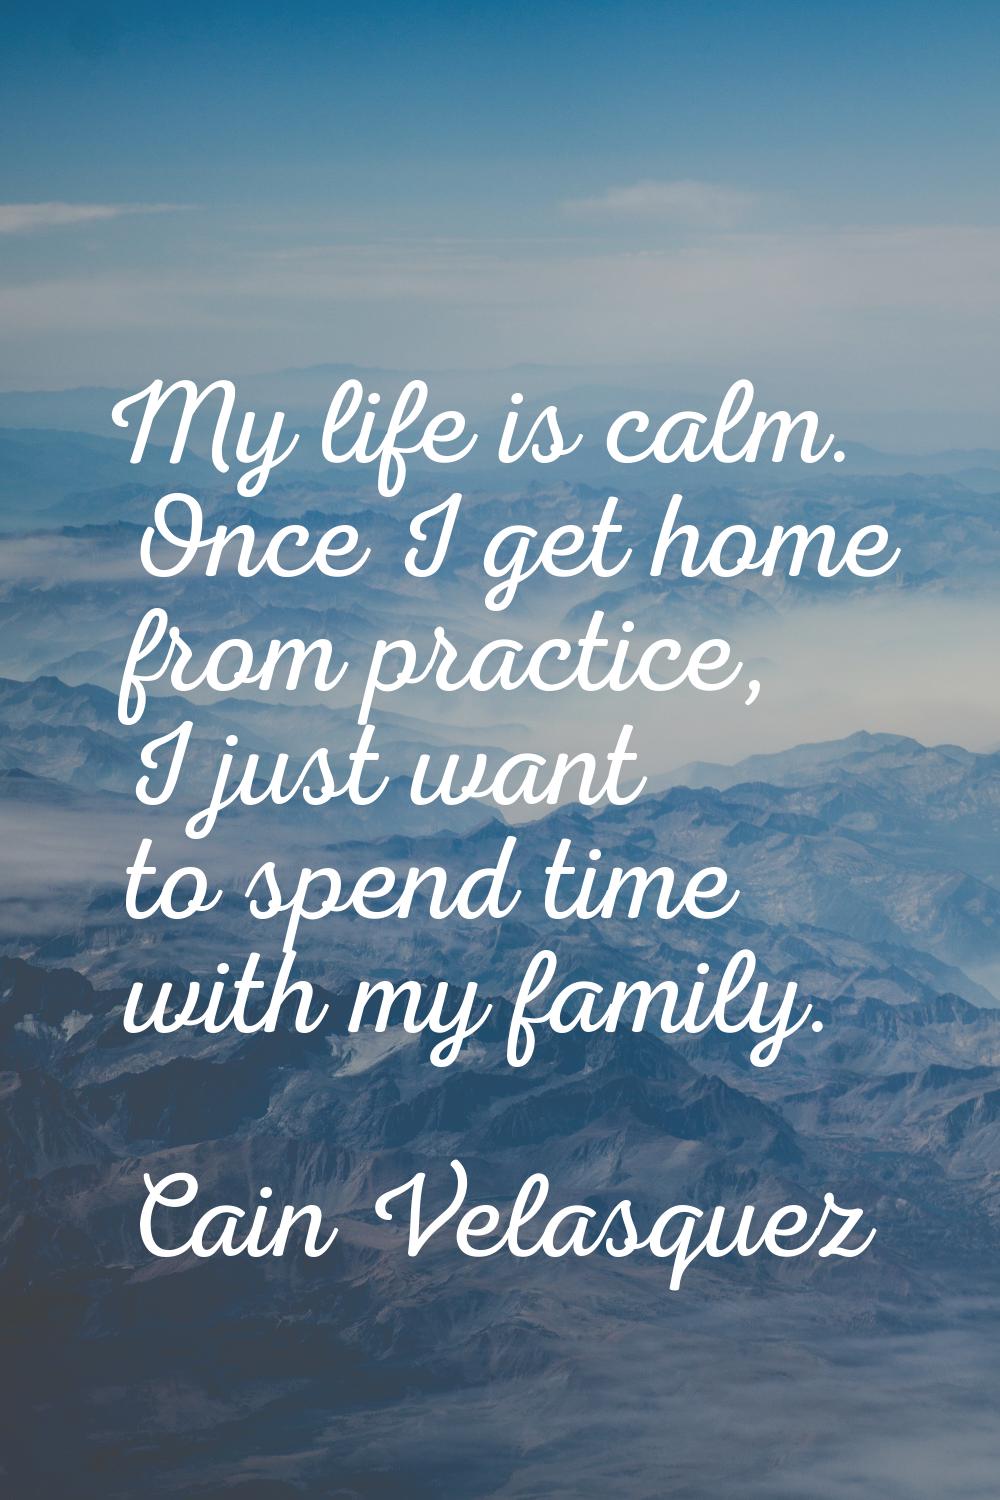 My life is calm. Once I get home from practice, I just want to spend time with my family.